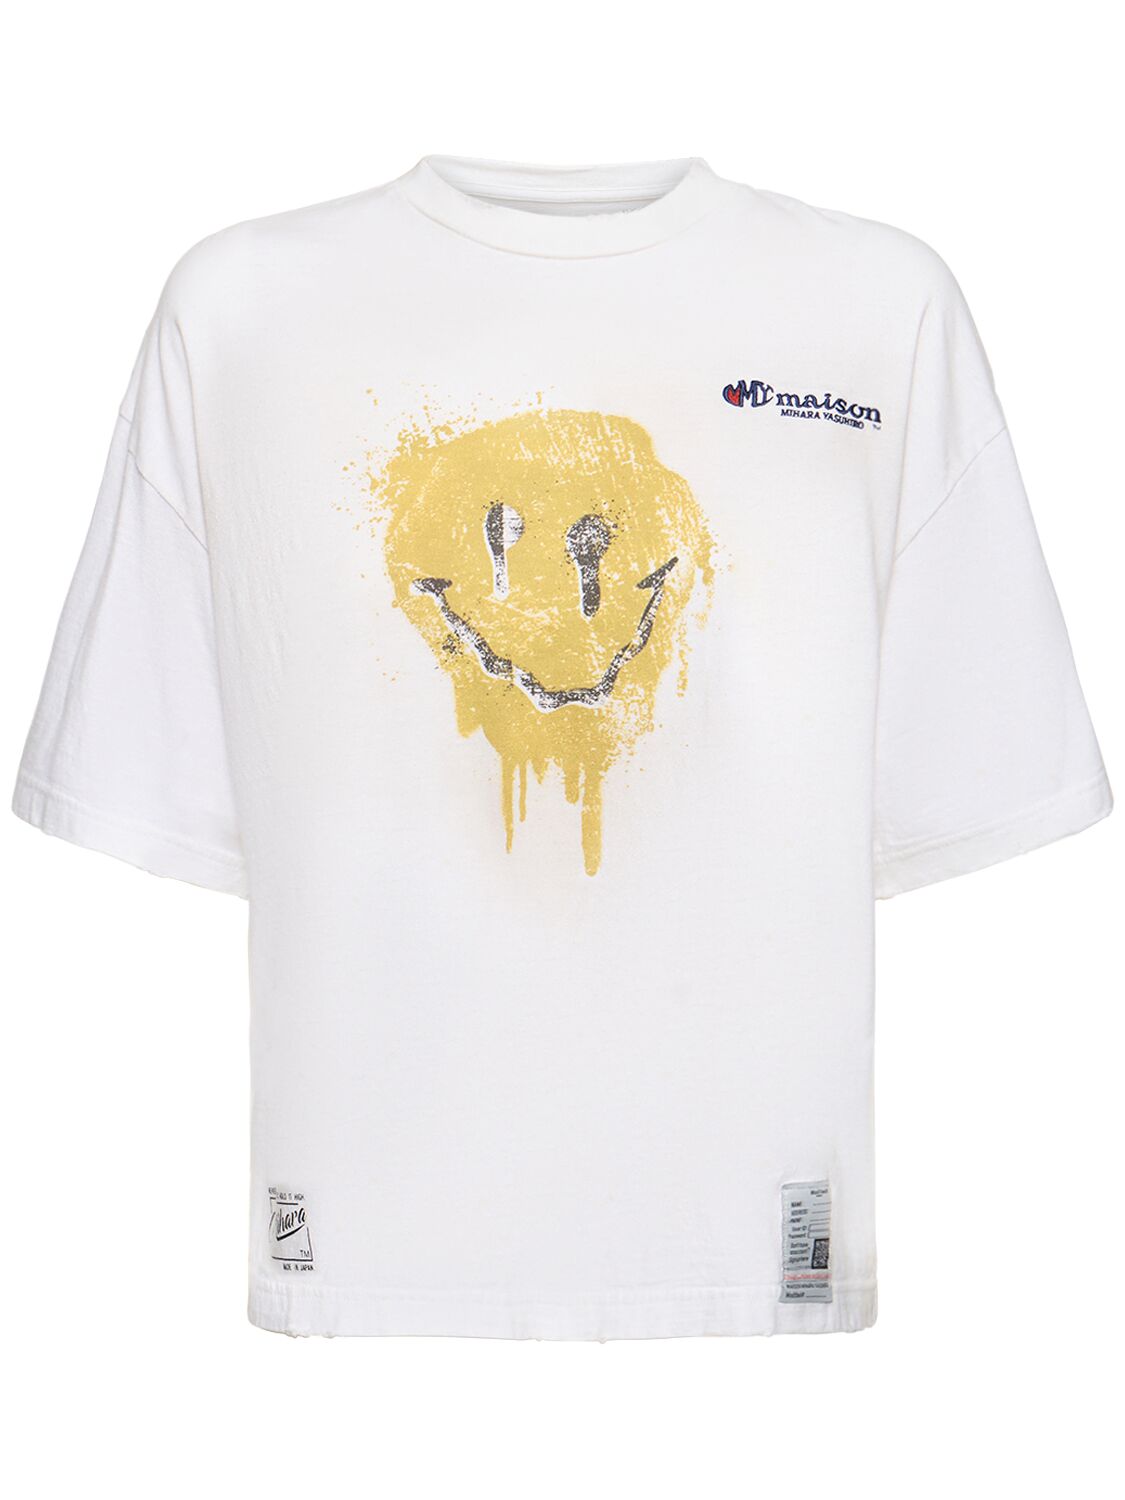 Image of Smiley Face Printed Cotton T-shirt